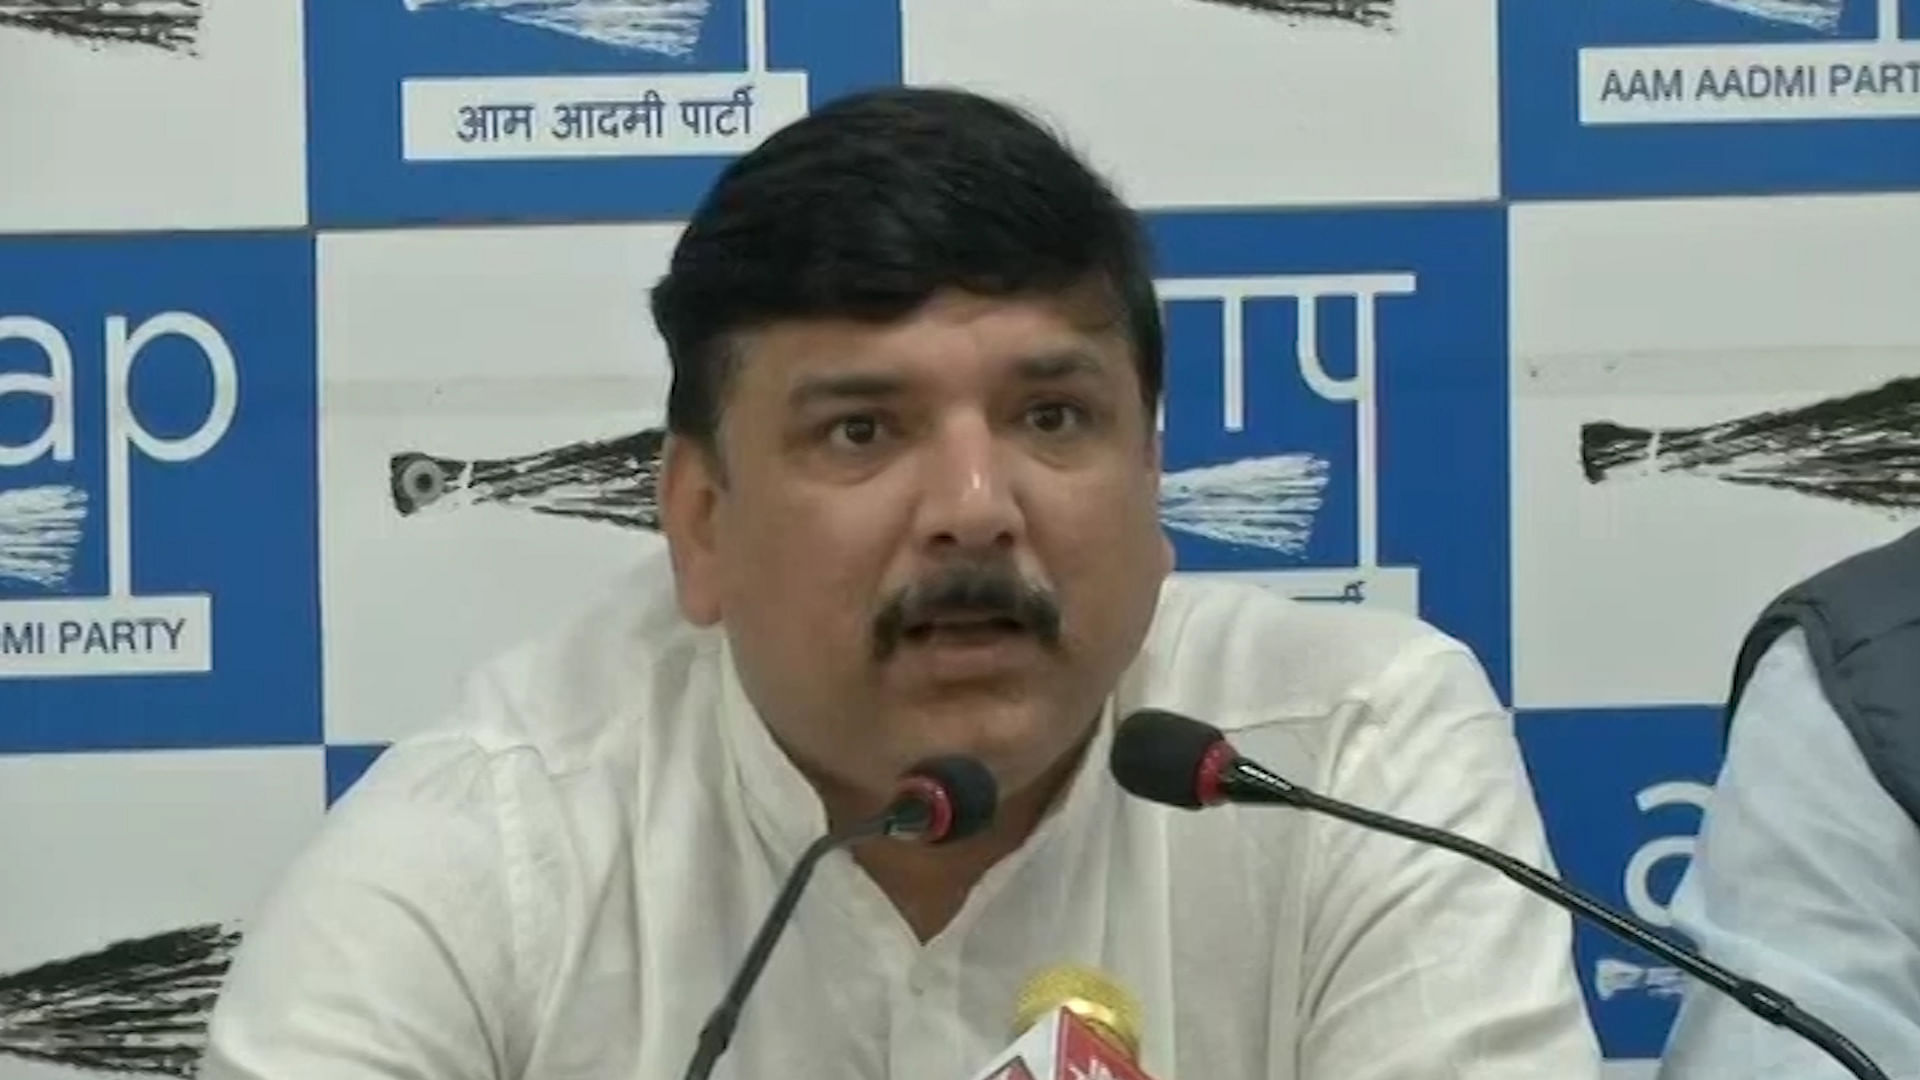 AAP’s Sanjay Singh addresses a press conference.